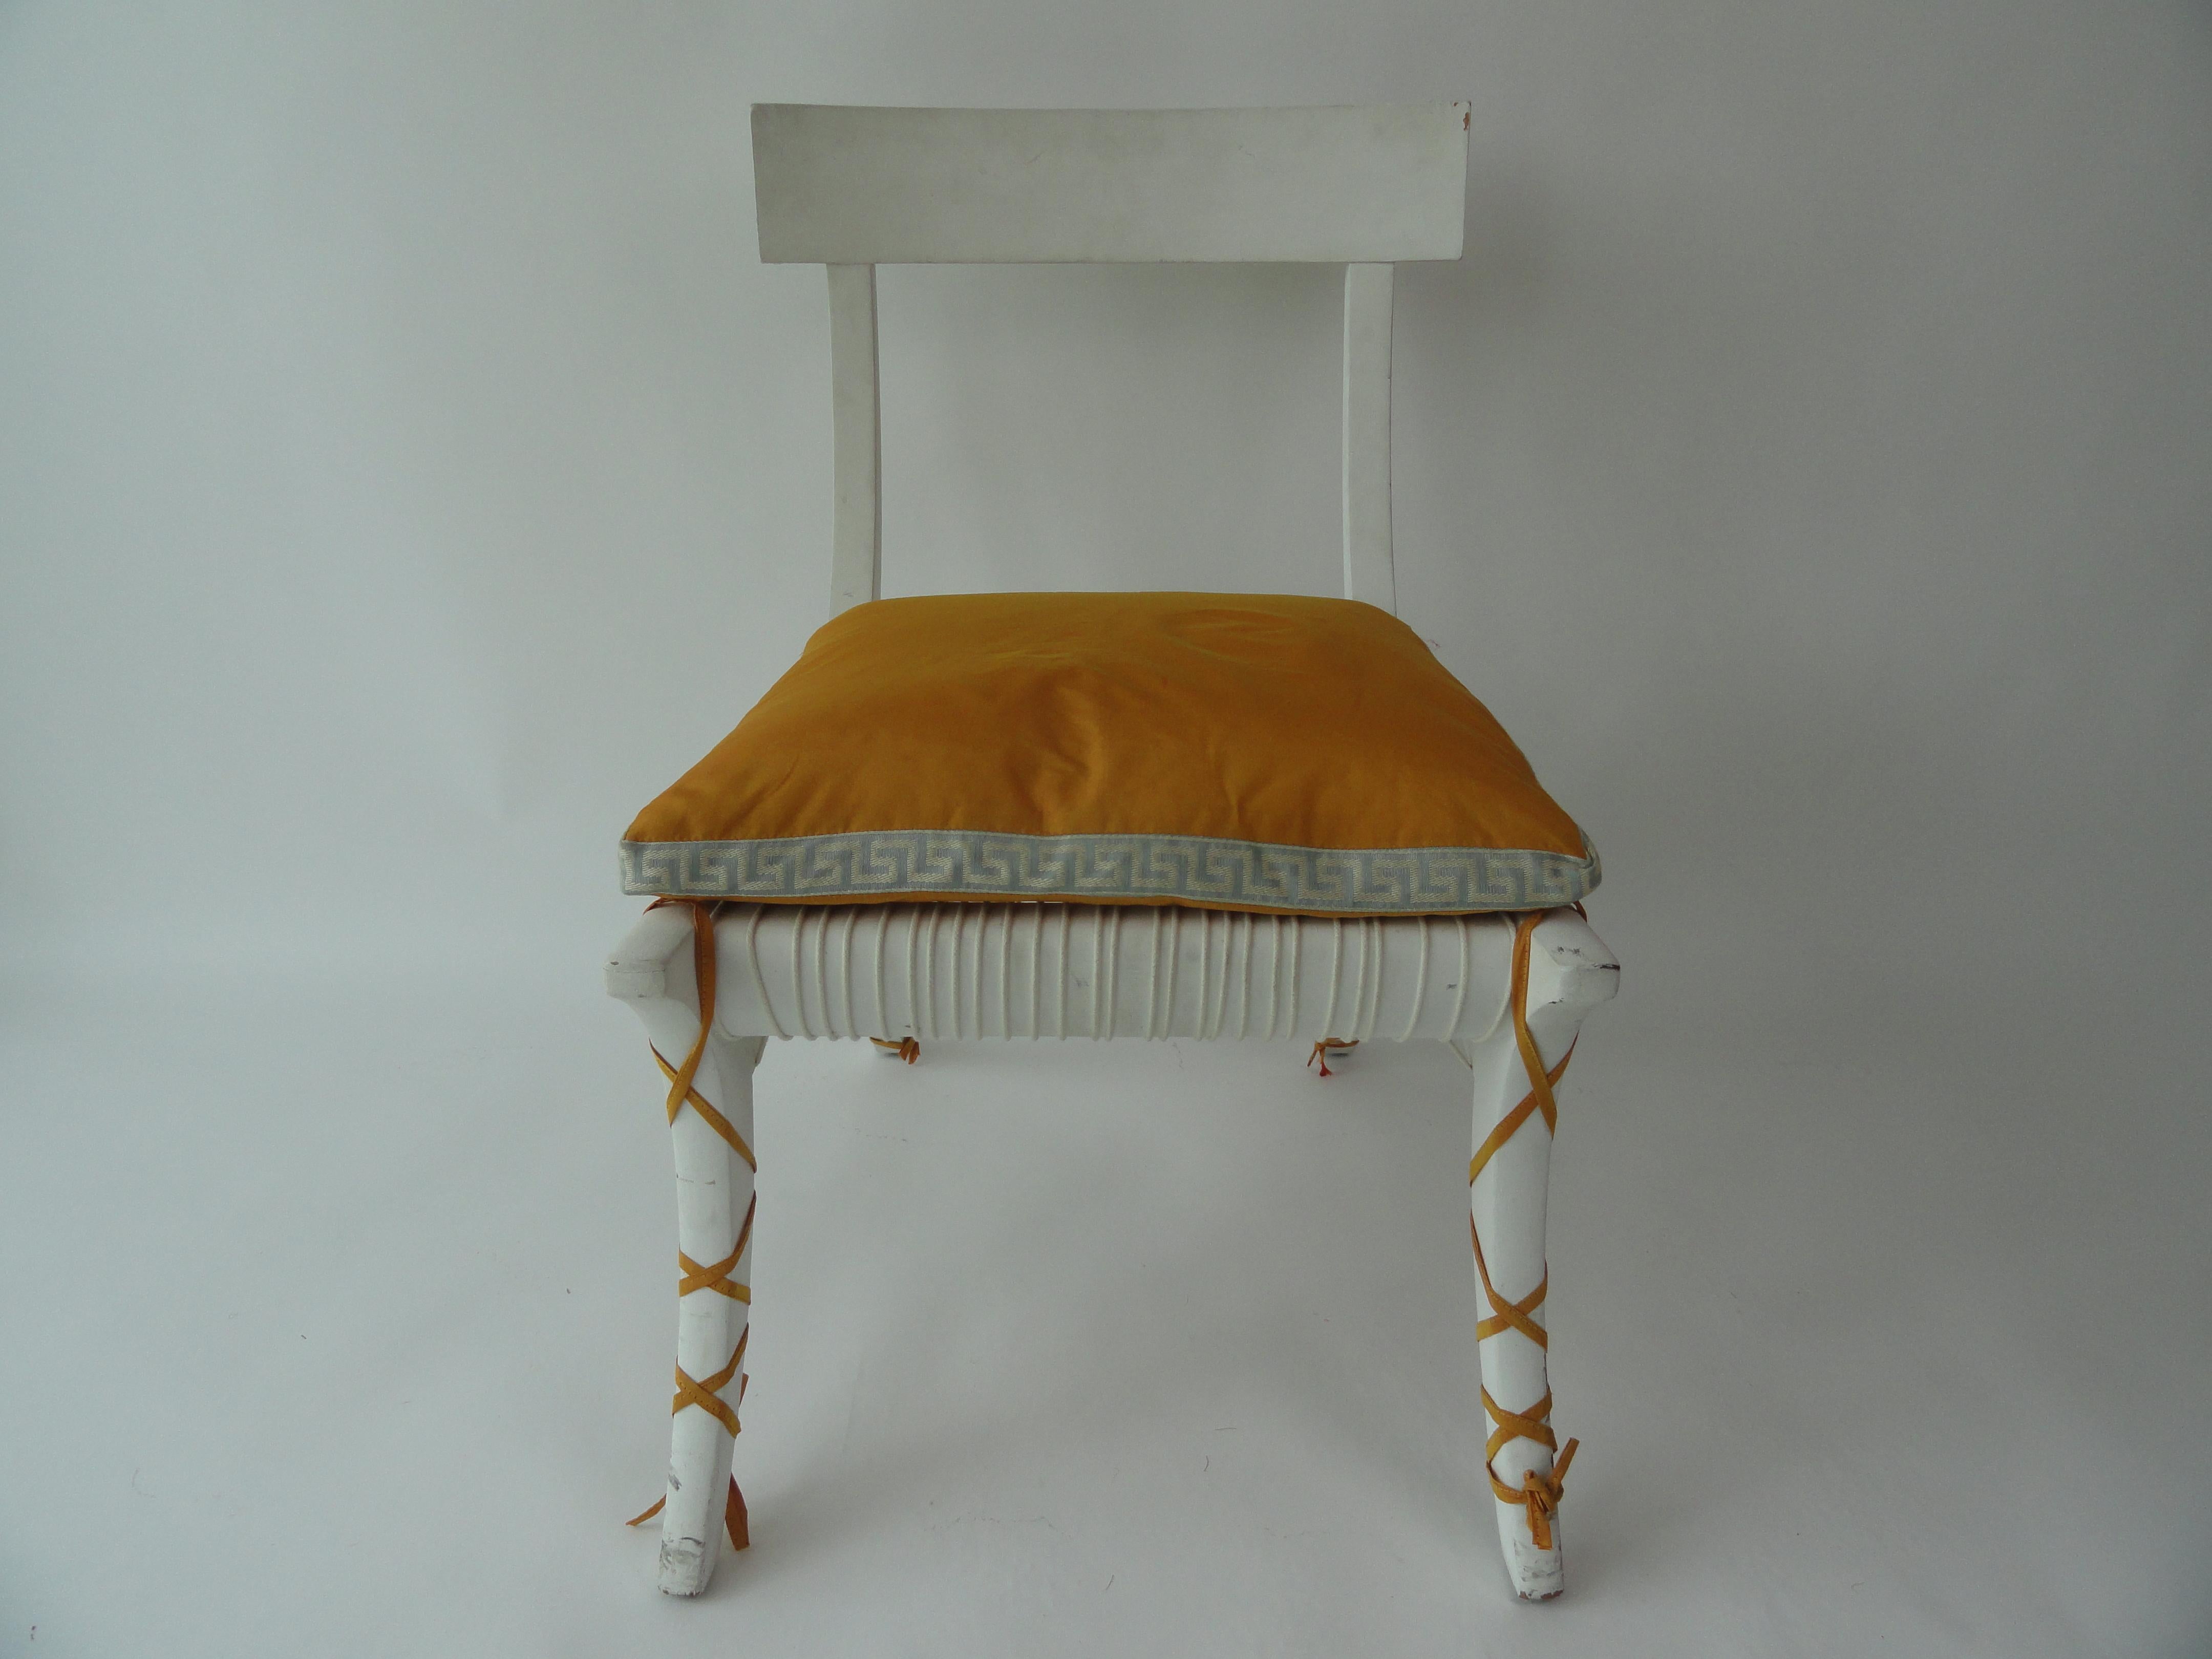 20th century, wood Klismos-style chair in white painted finish with custom cushion. Cushion has Greek key banding detail and straps that wrap around the legs. Seat has cotton cording strapping. See detail pics.